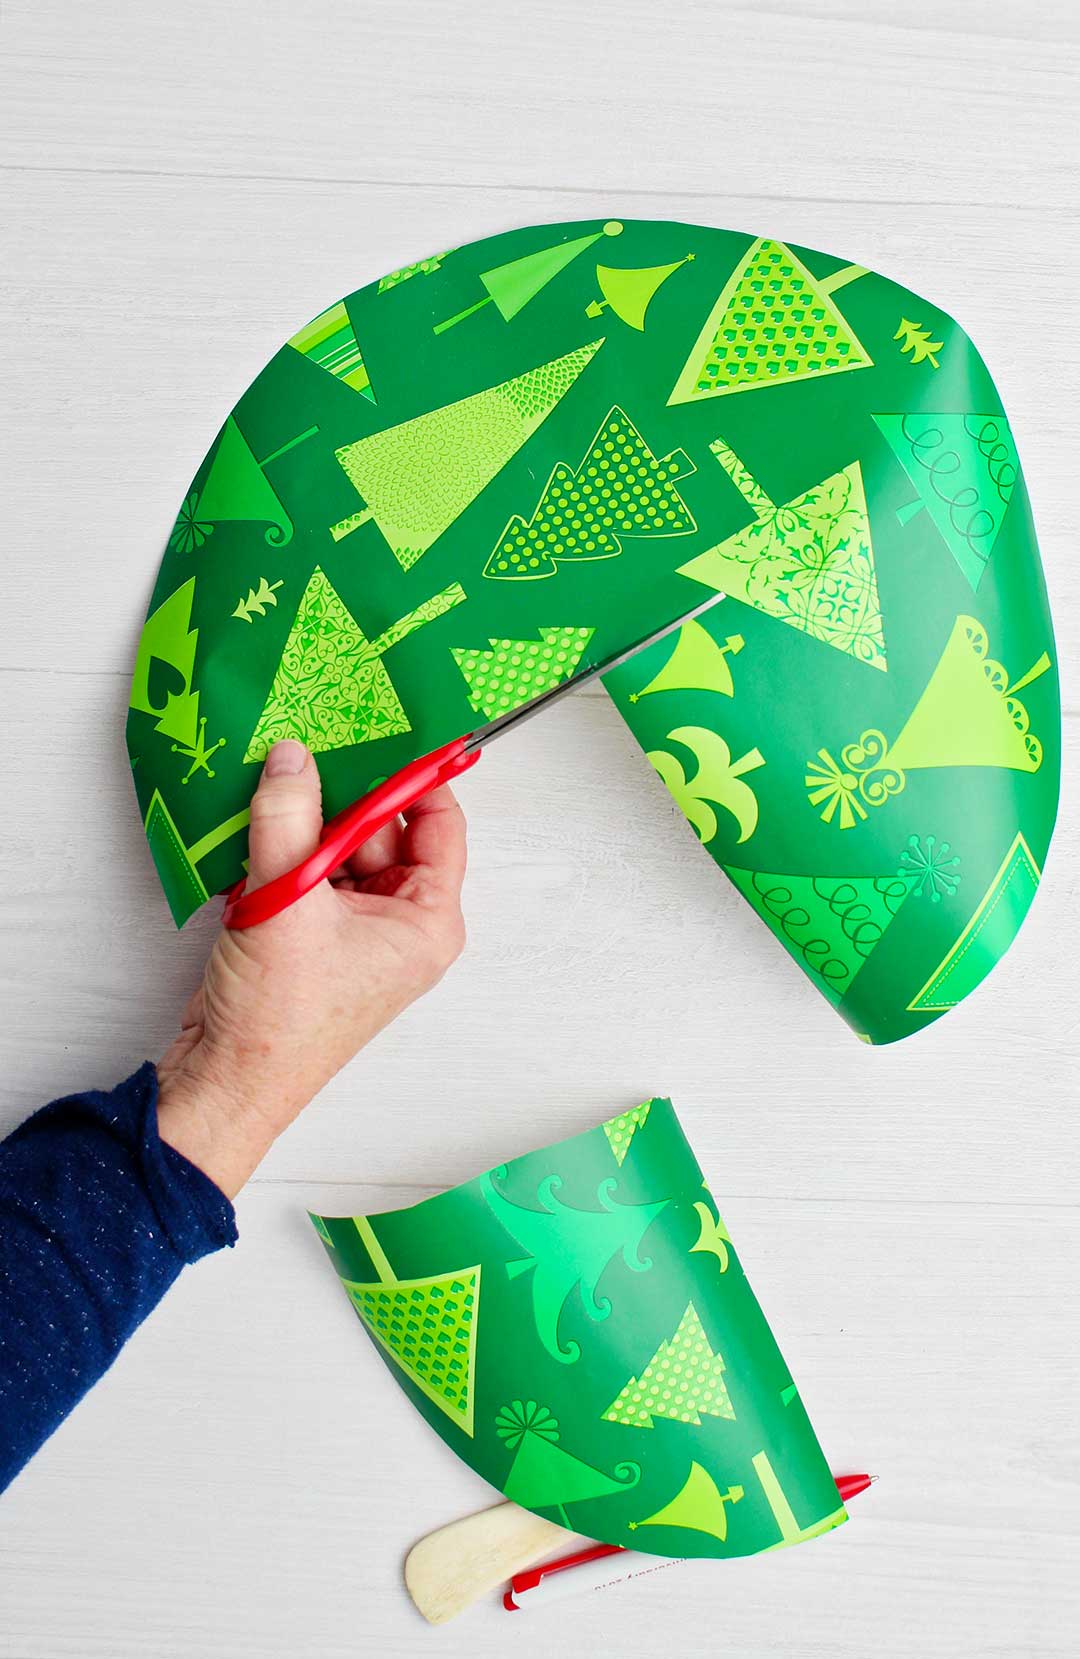 Hand cutting section out of a circular cut out of patterned green tree paper.